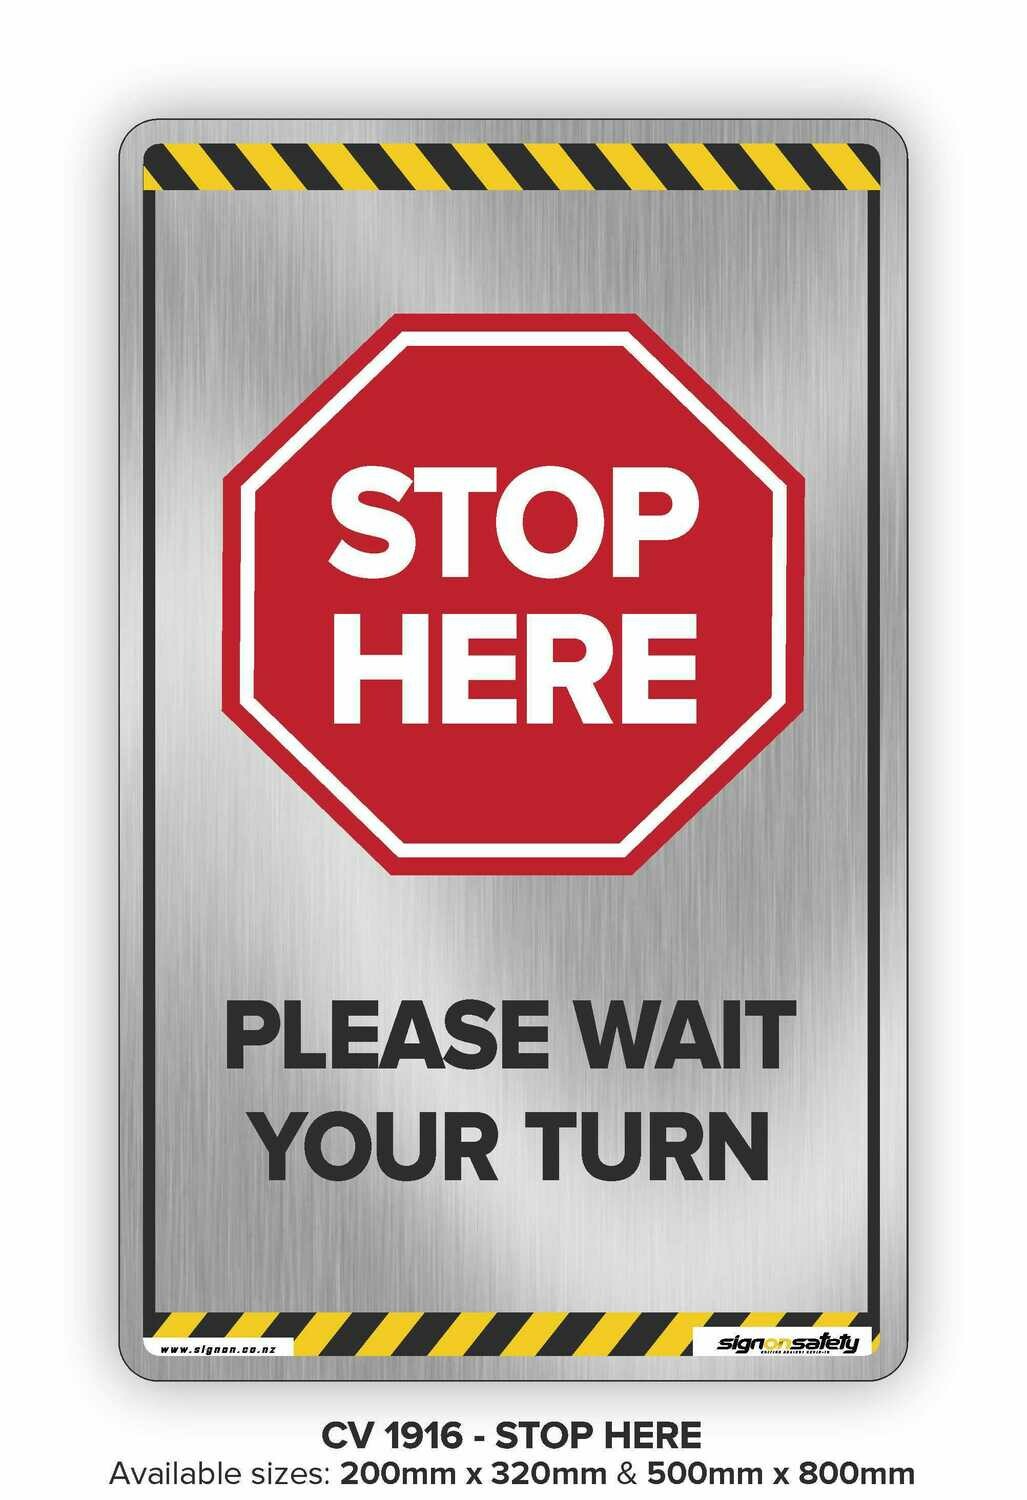 Stop Here - Wait Your Turn